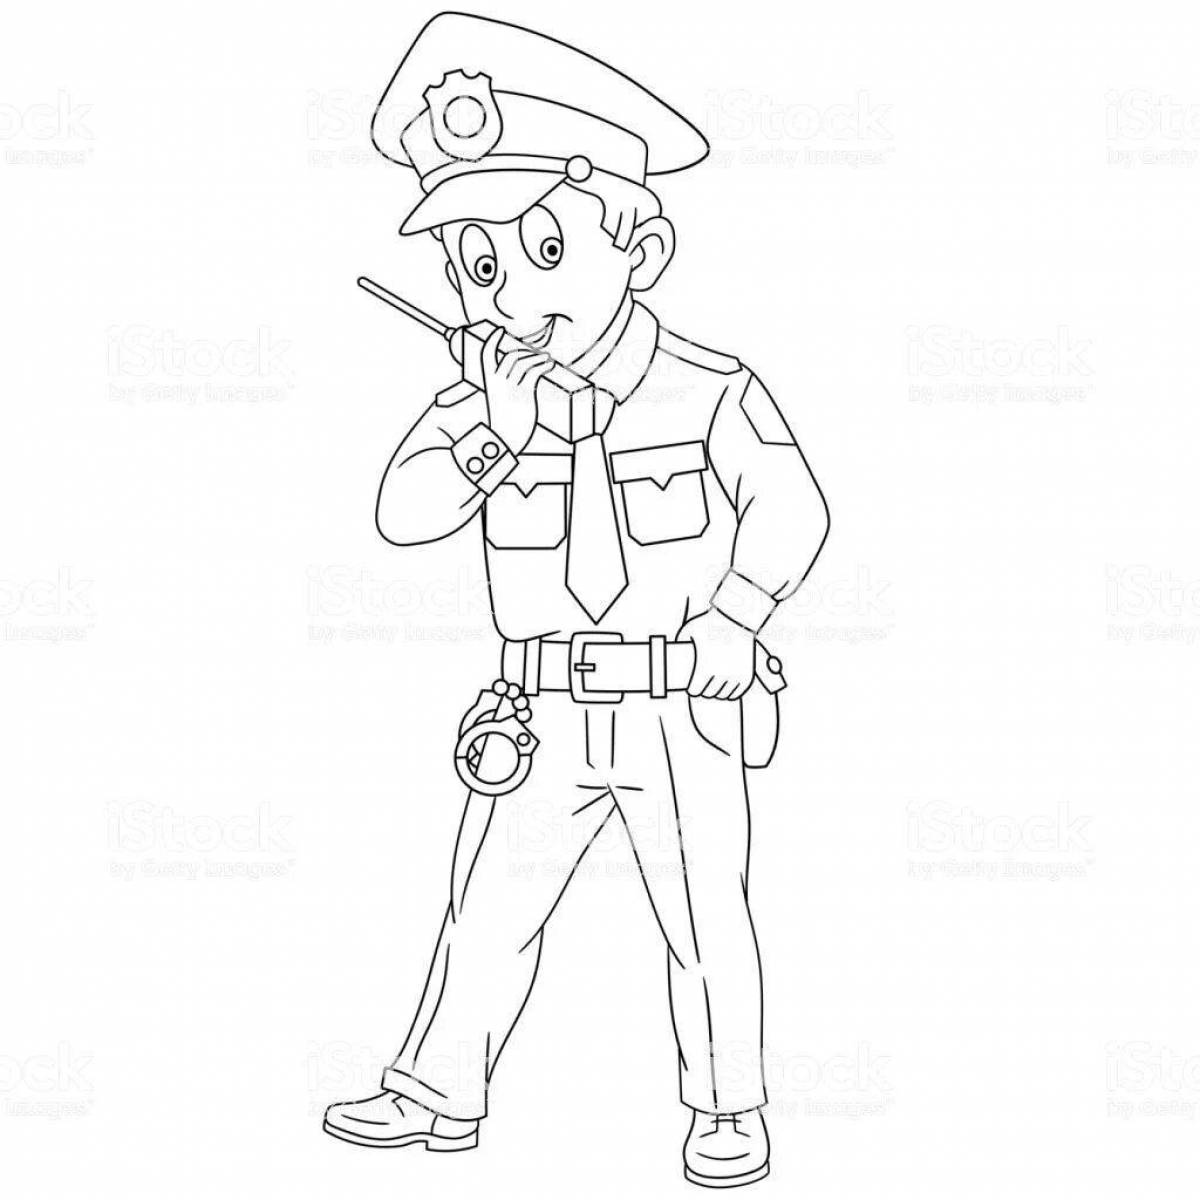 Animated Police Profession Coloring Page